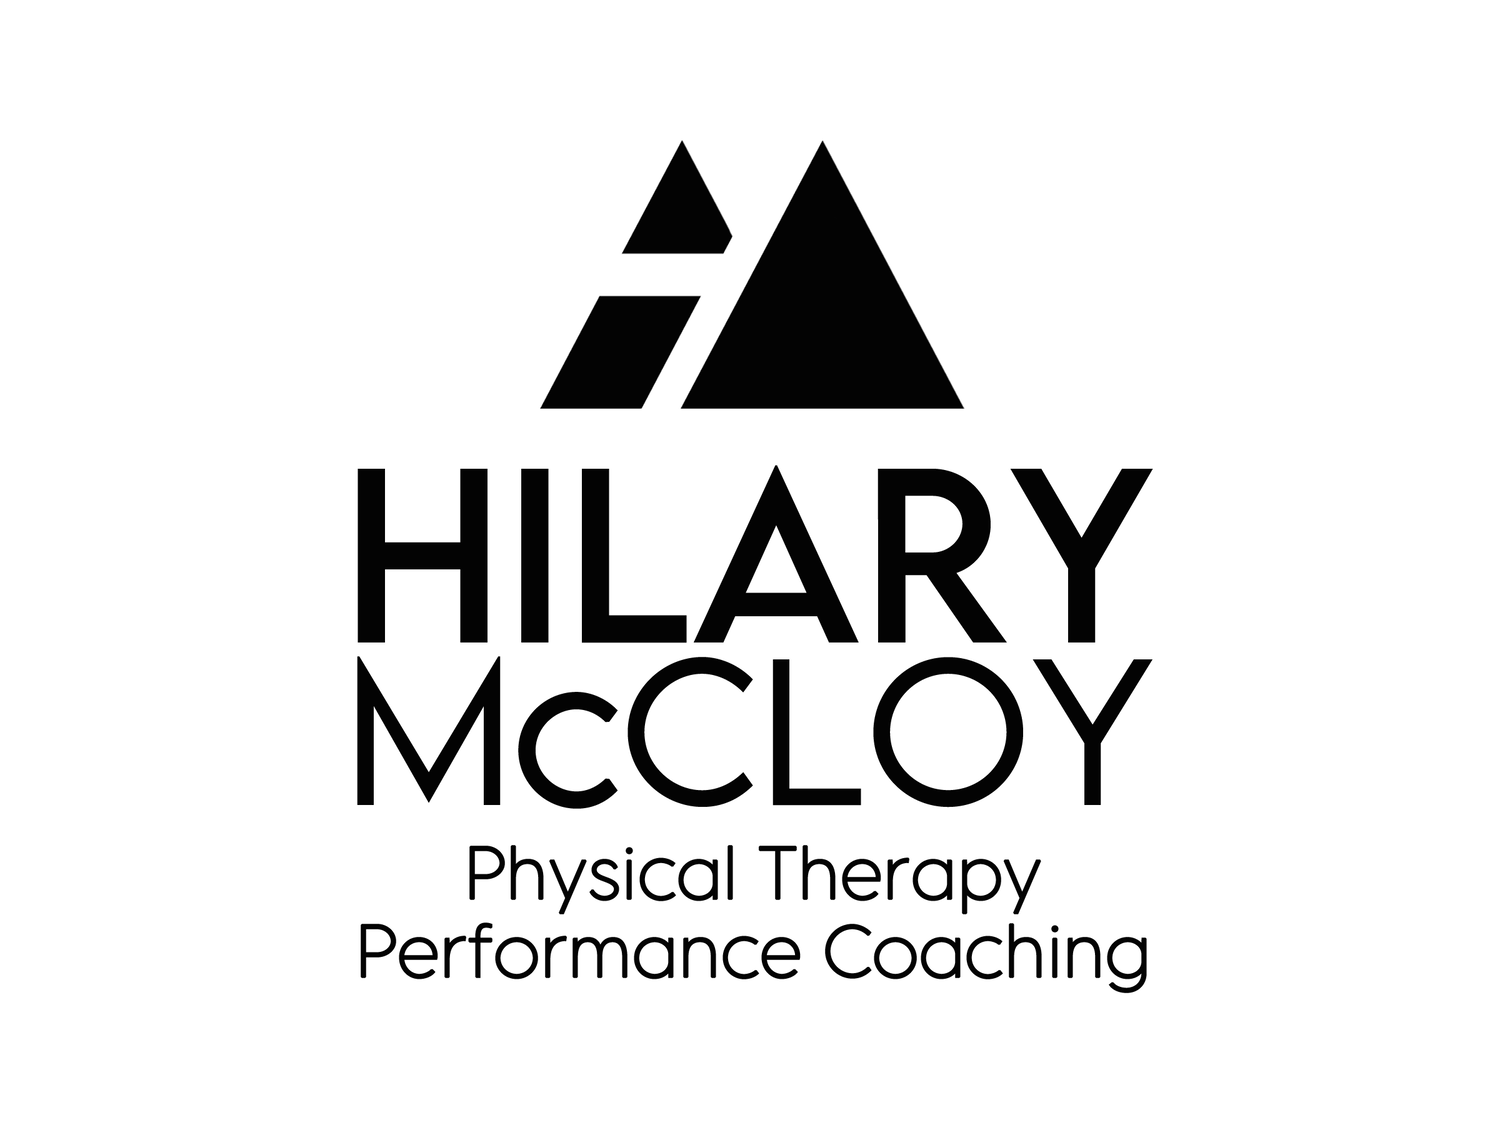 Hilary McCloy Physical Therapy logo